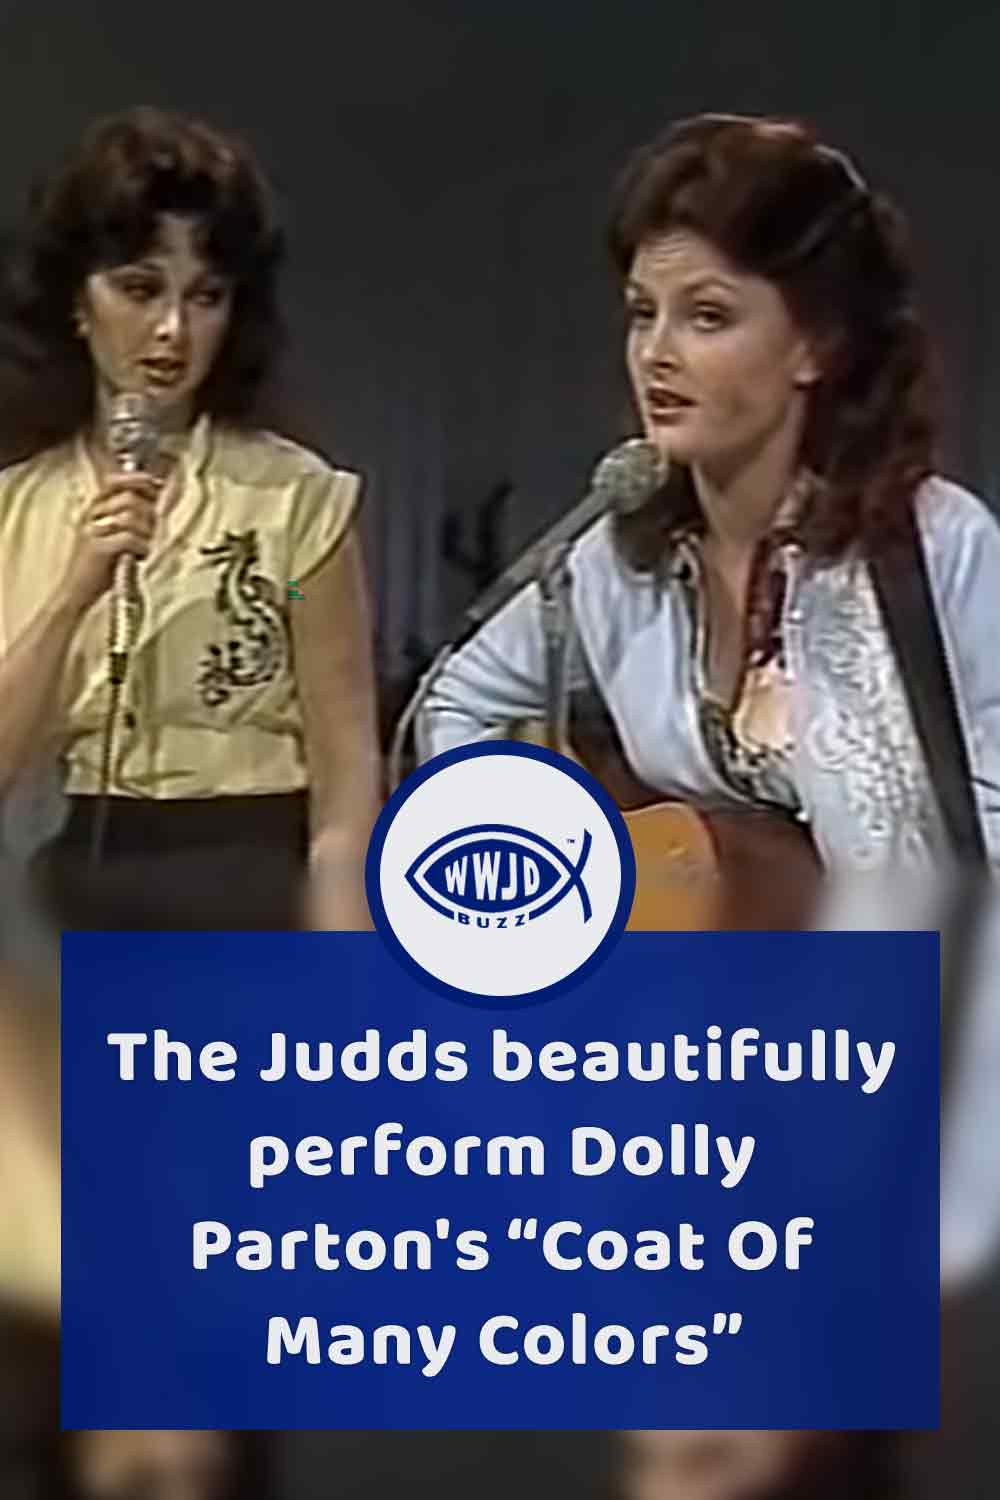 The Judds beautifully perform Dolly Parton\'s “Coat Of Many Colors”